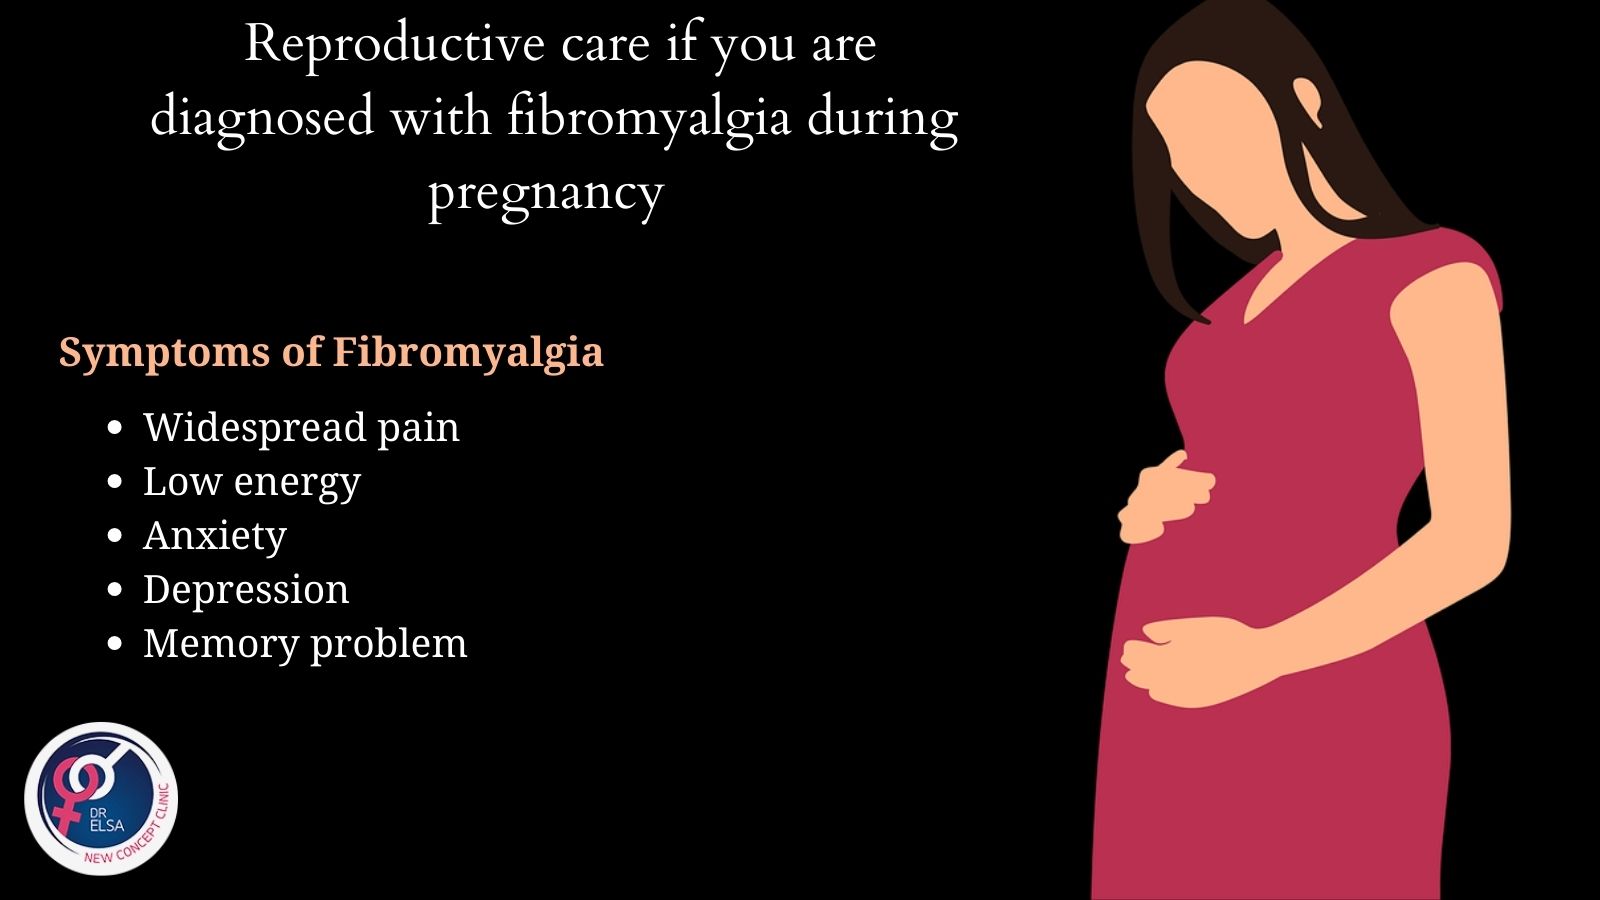 Reproductive care if you are diagnosed with fibromyalgia during pregnancy 